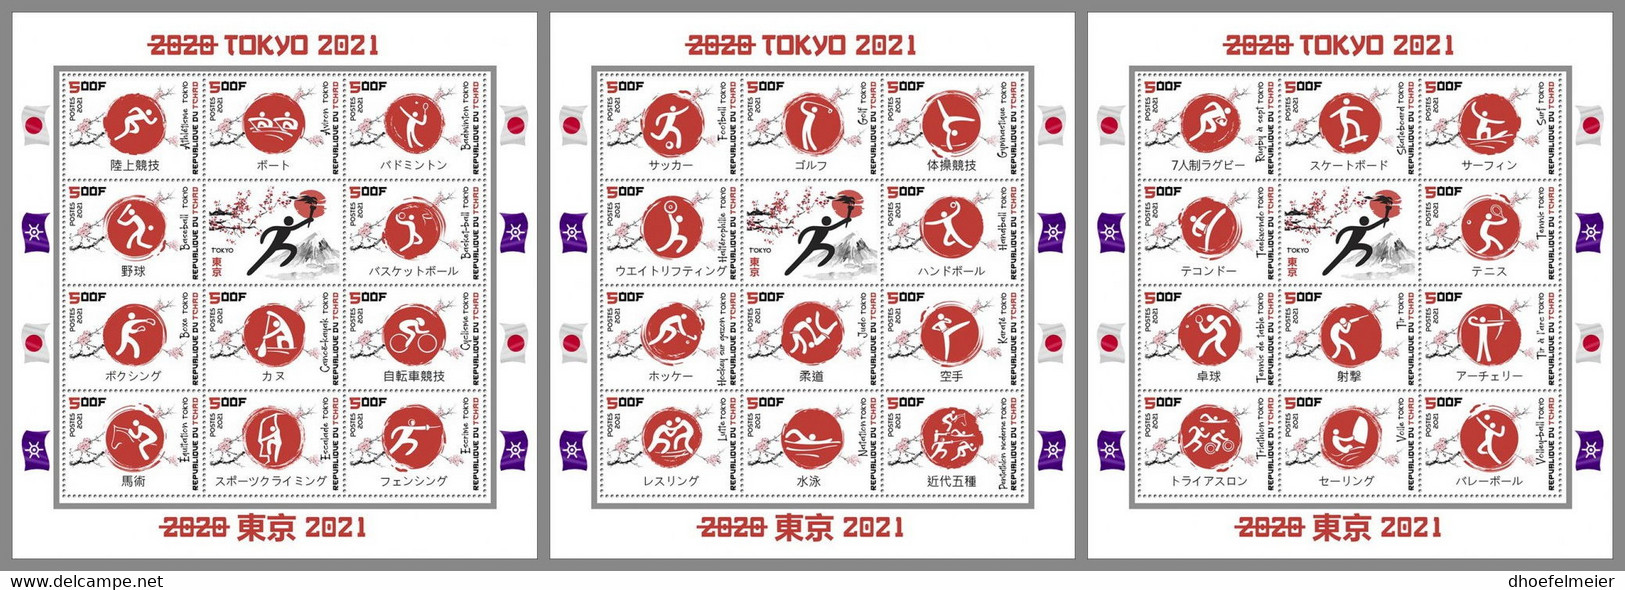 CHAD 2021 MNH Tokyo Summer Games 2021 Olympische Sommerspiele 3M/S - OFFICIAL ISSUE - DHQ2214 - Zomer 2020: Tokio